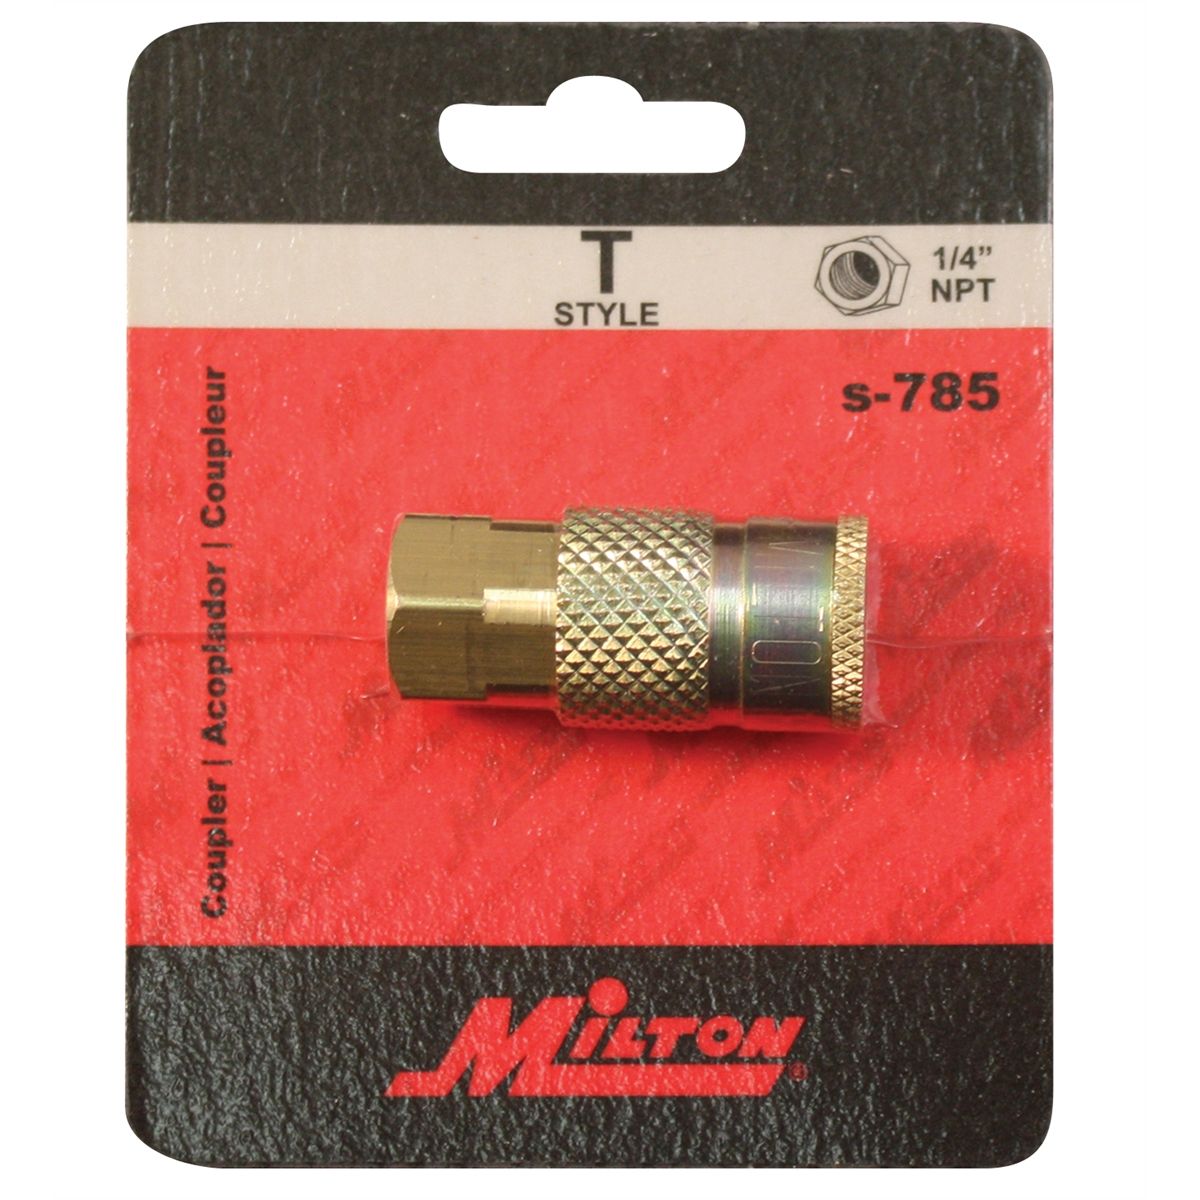 Tru-Flate Automotive Quick Coupler Air Hose Connector Fittings 1/4 NPT T Style 